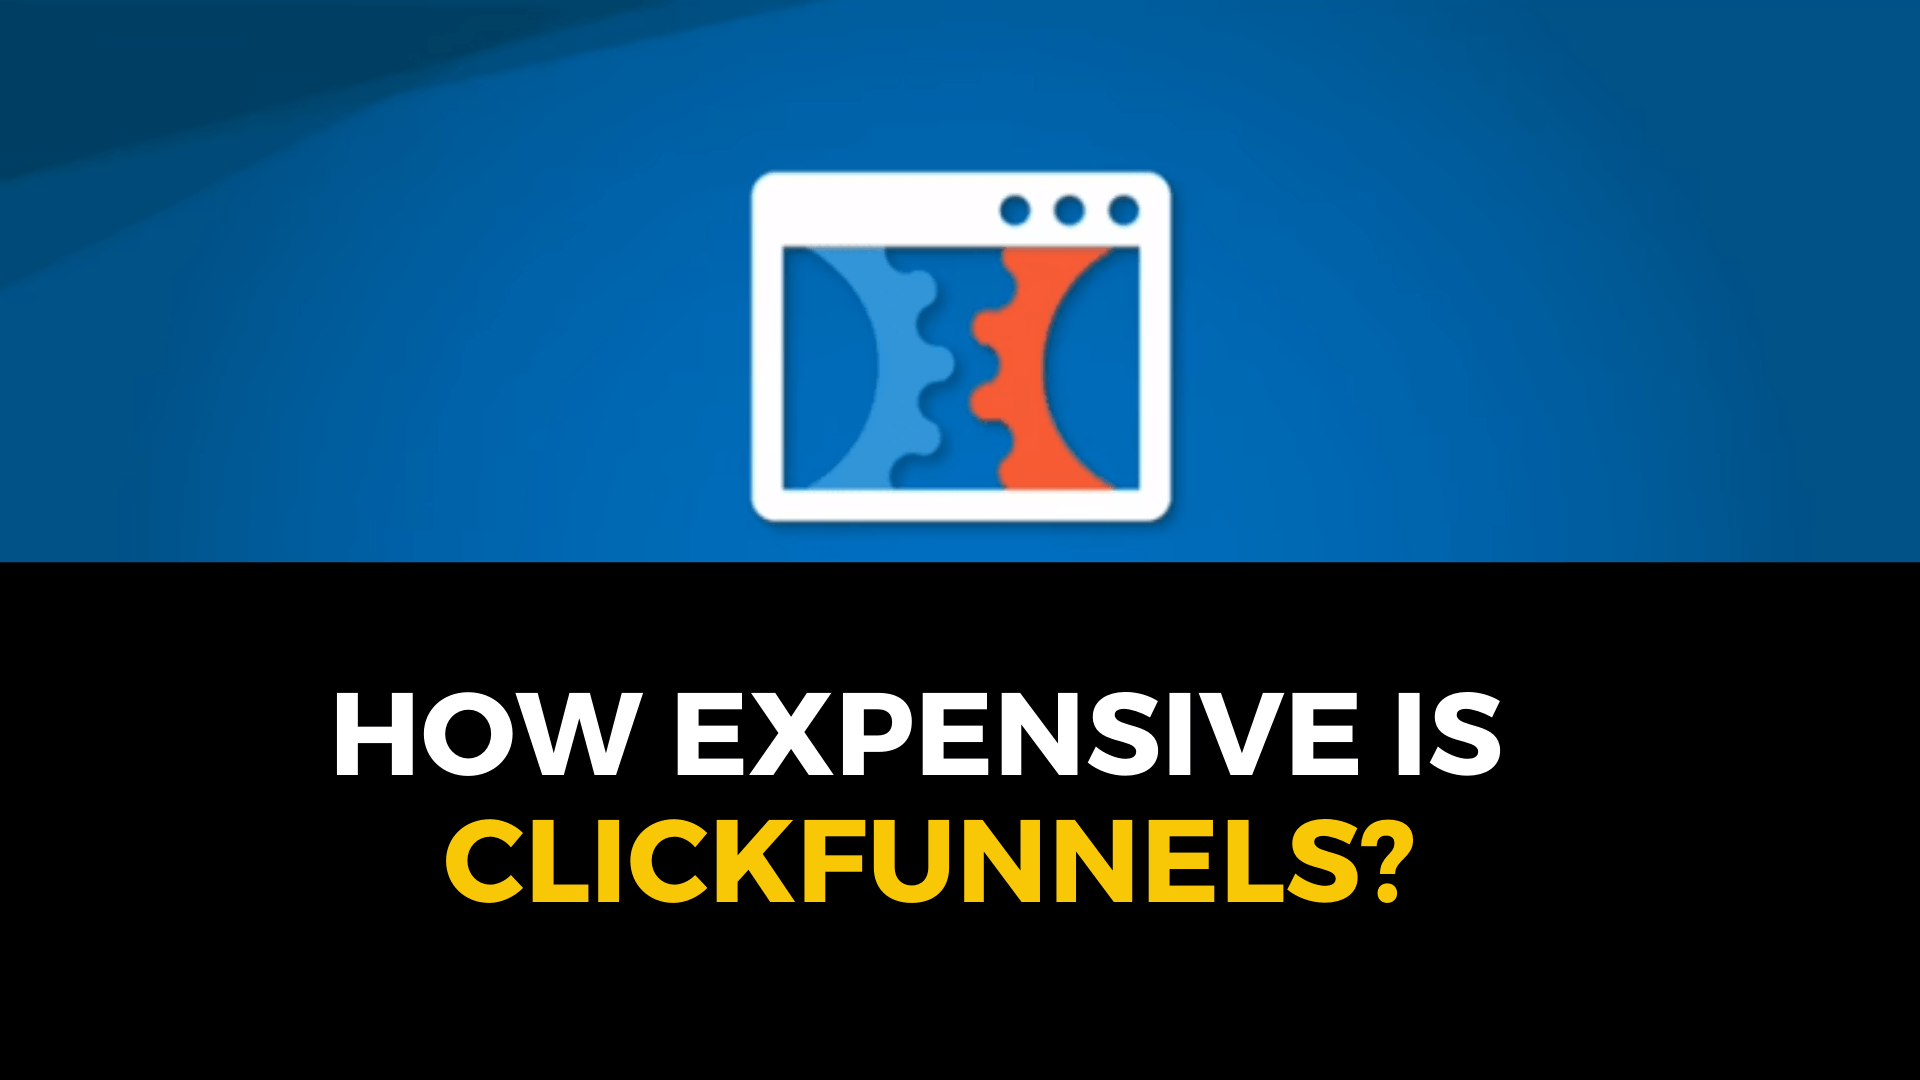 How expensive is ClickFunnels?